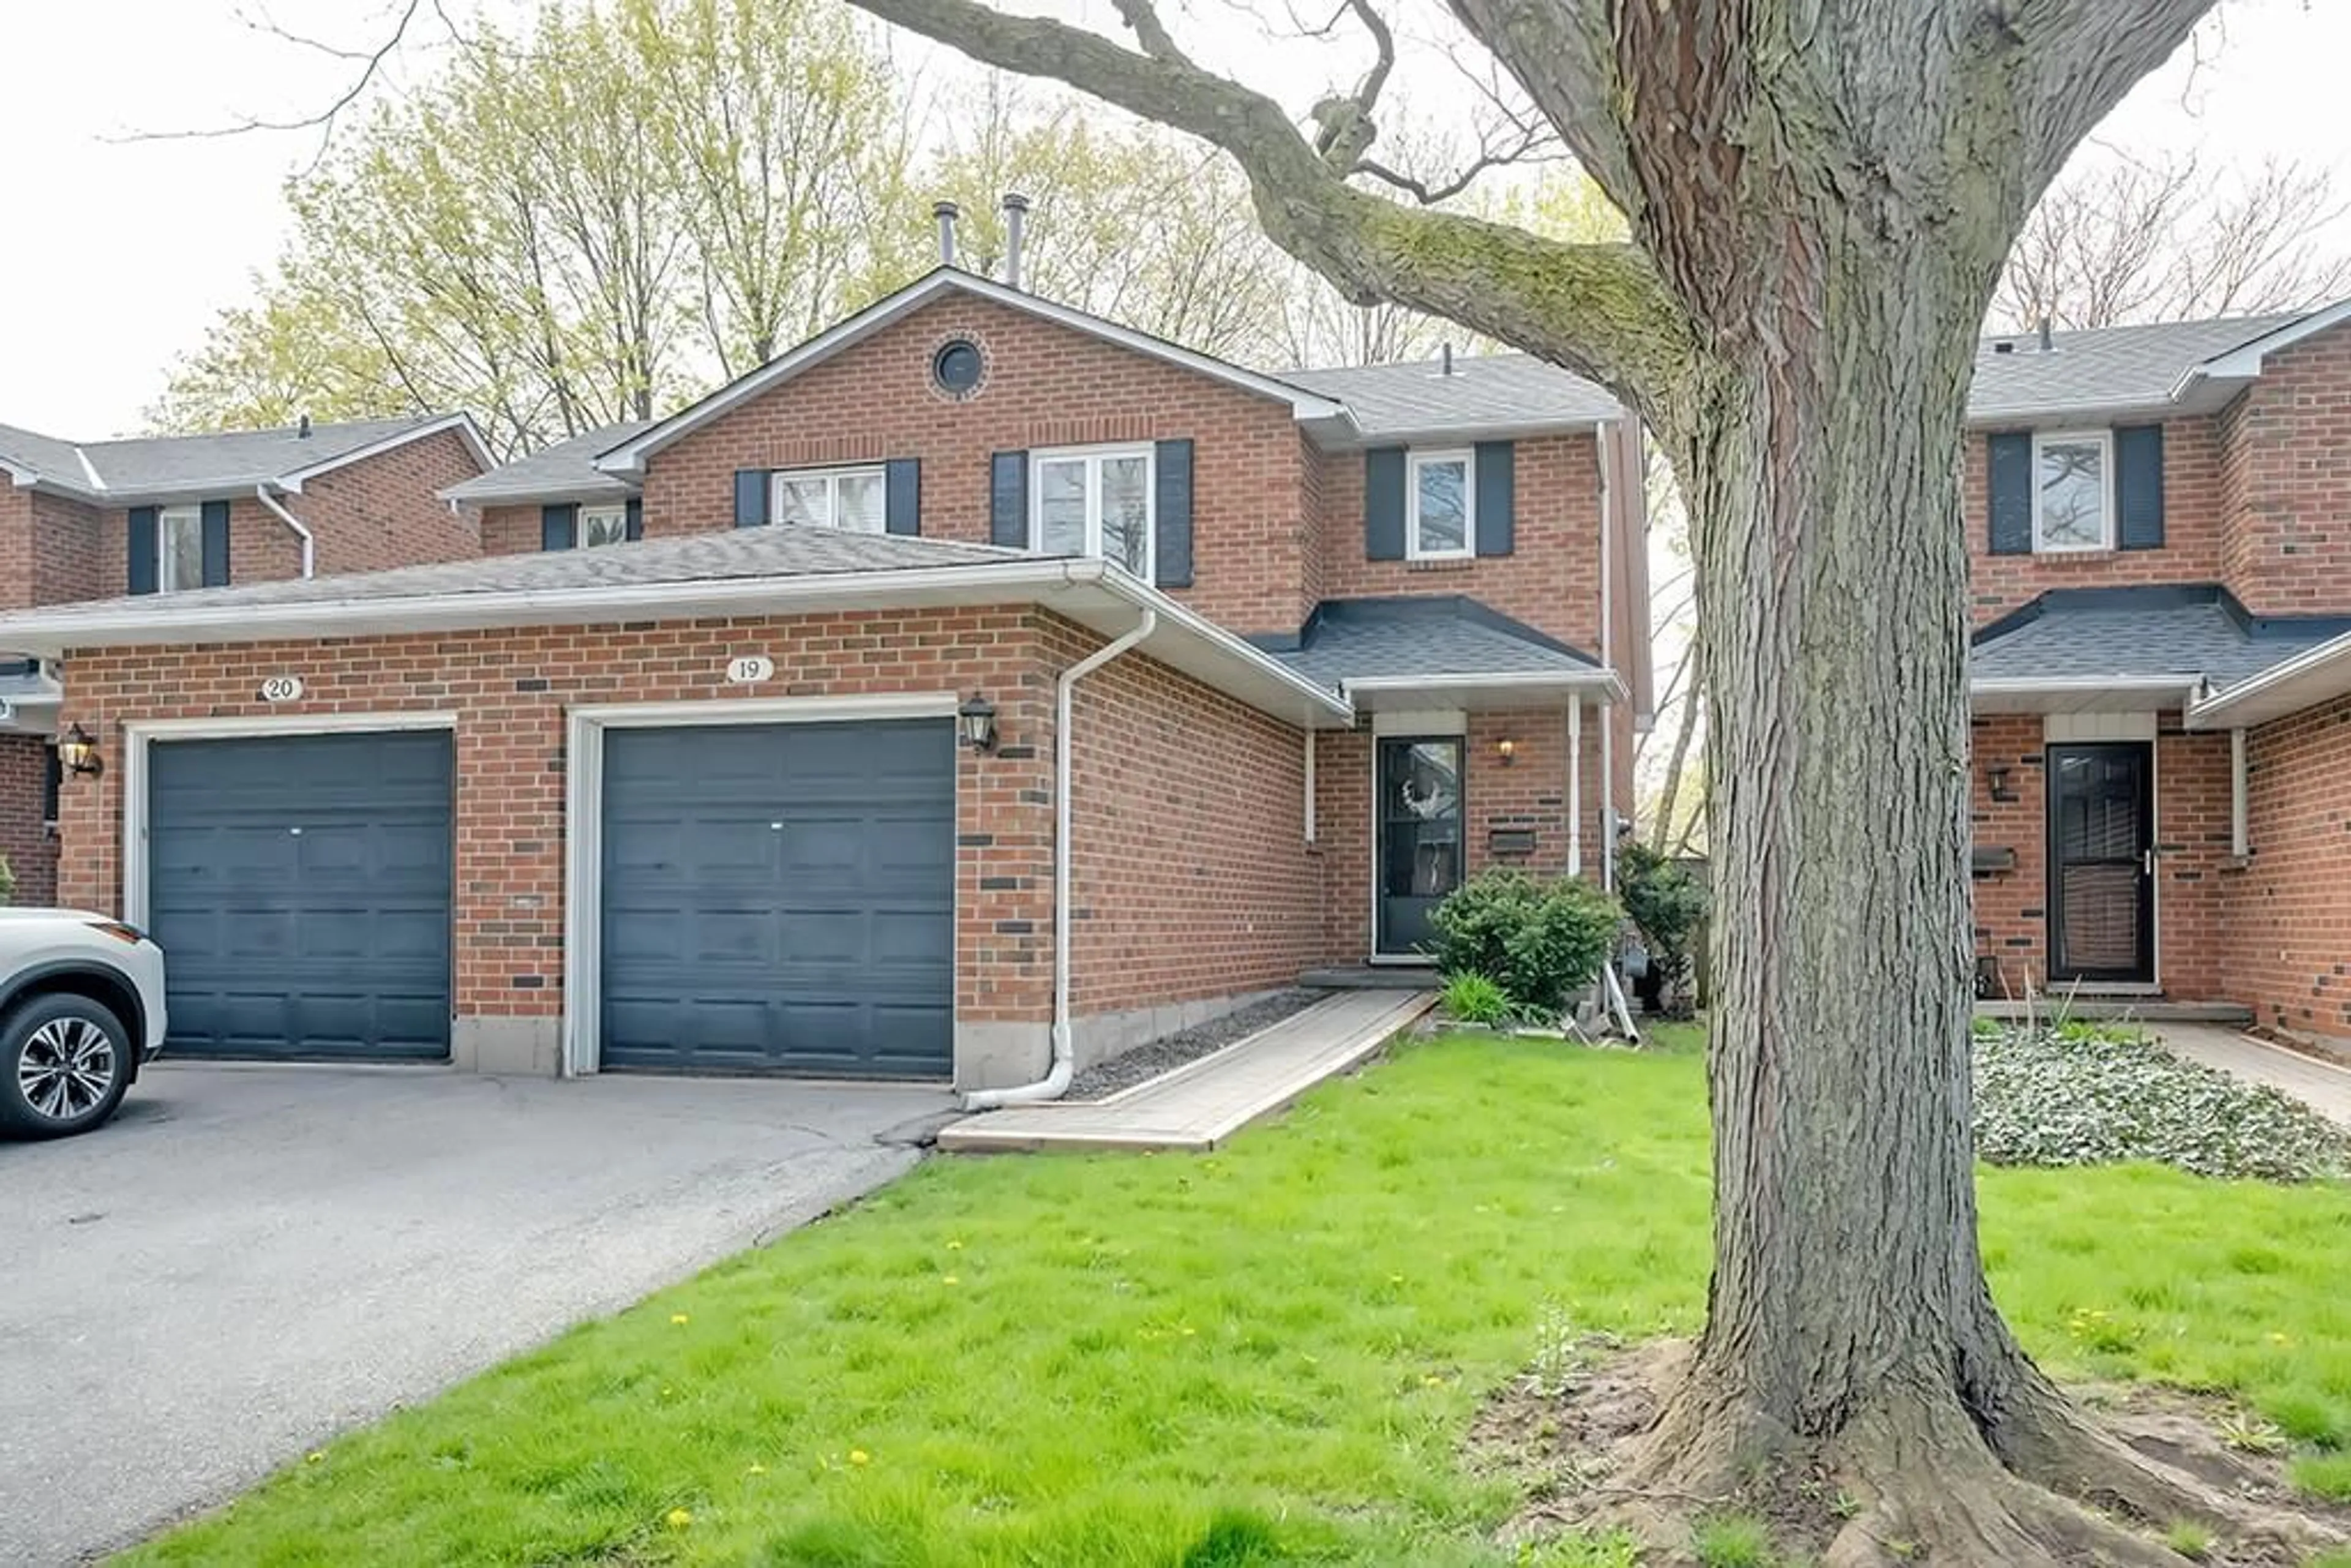 Home with brick exterior material for 935 KING Rd #19, Burlington Ontario L7T 3L2